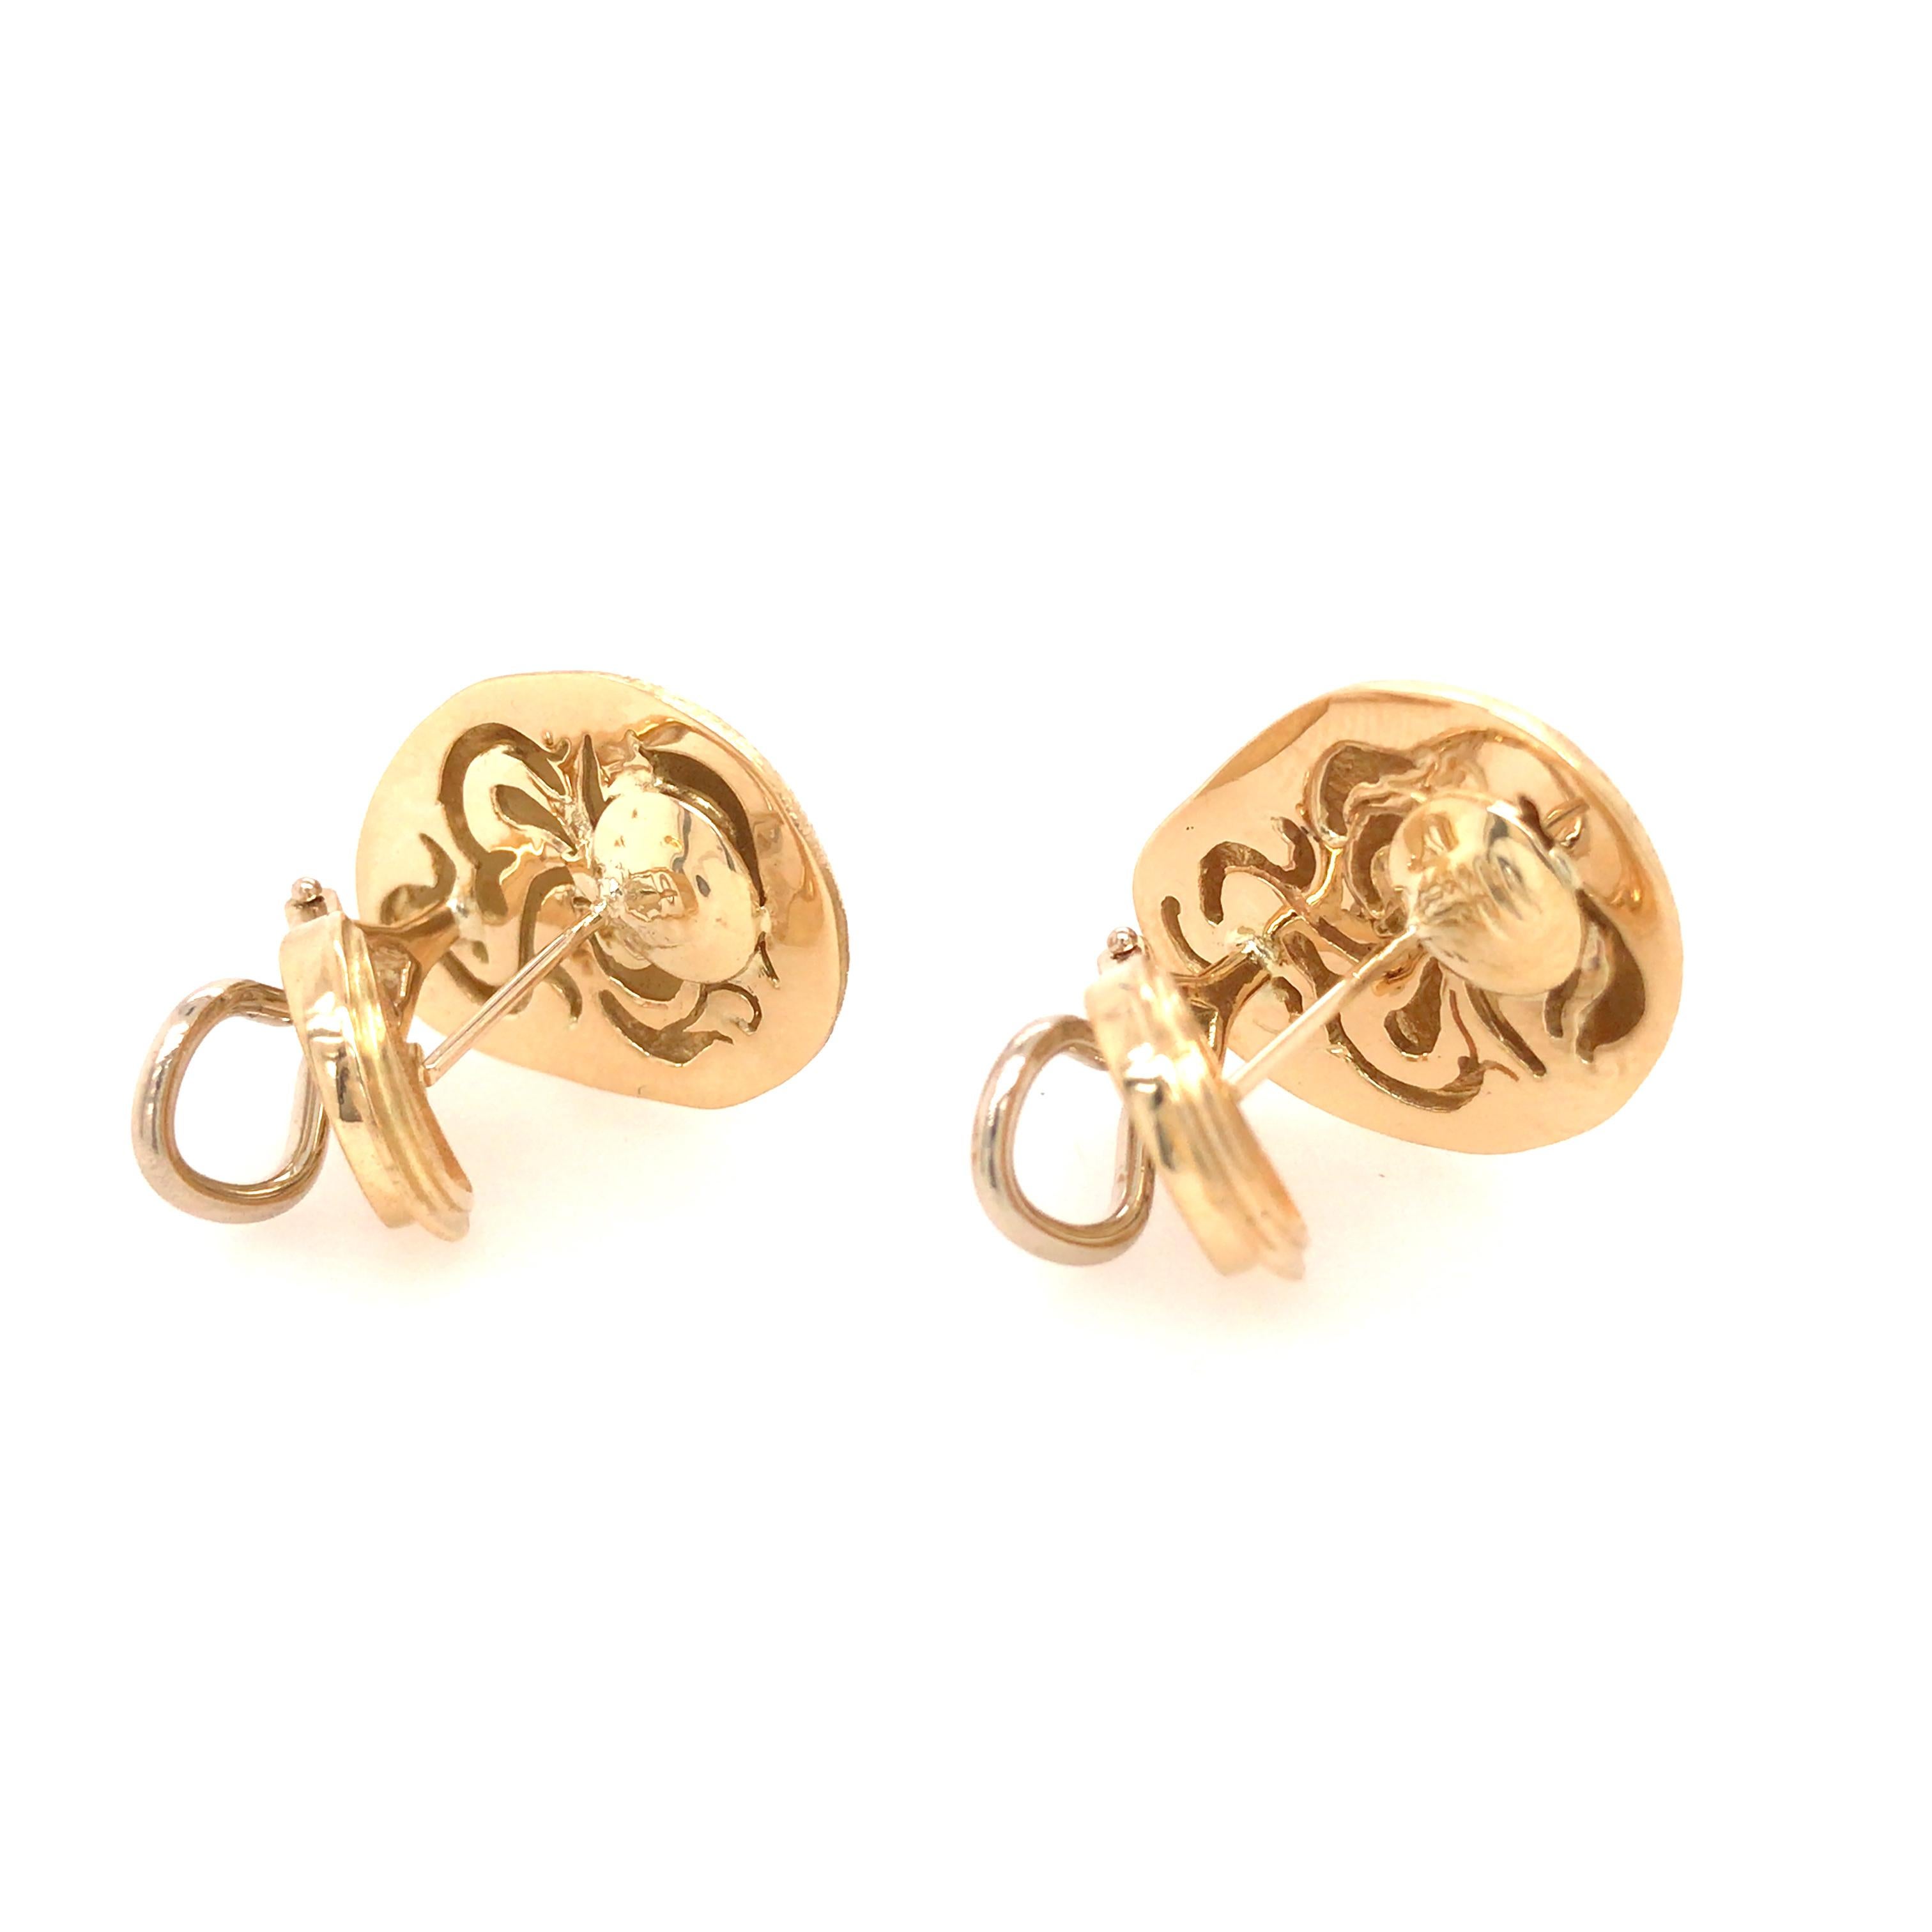 18K Satin Finish Jellybean Shape Earrings Yellow Gold In Good Condition For Sale In Boca Raton, FL